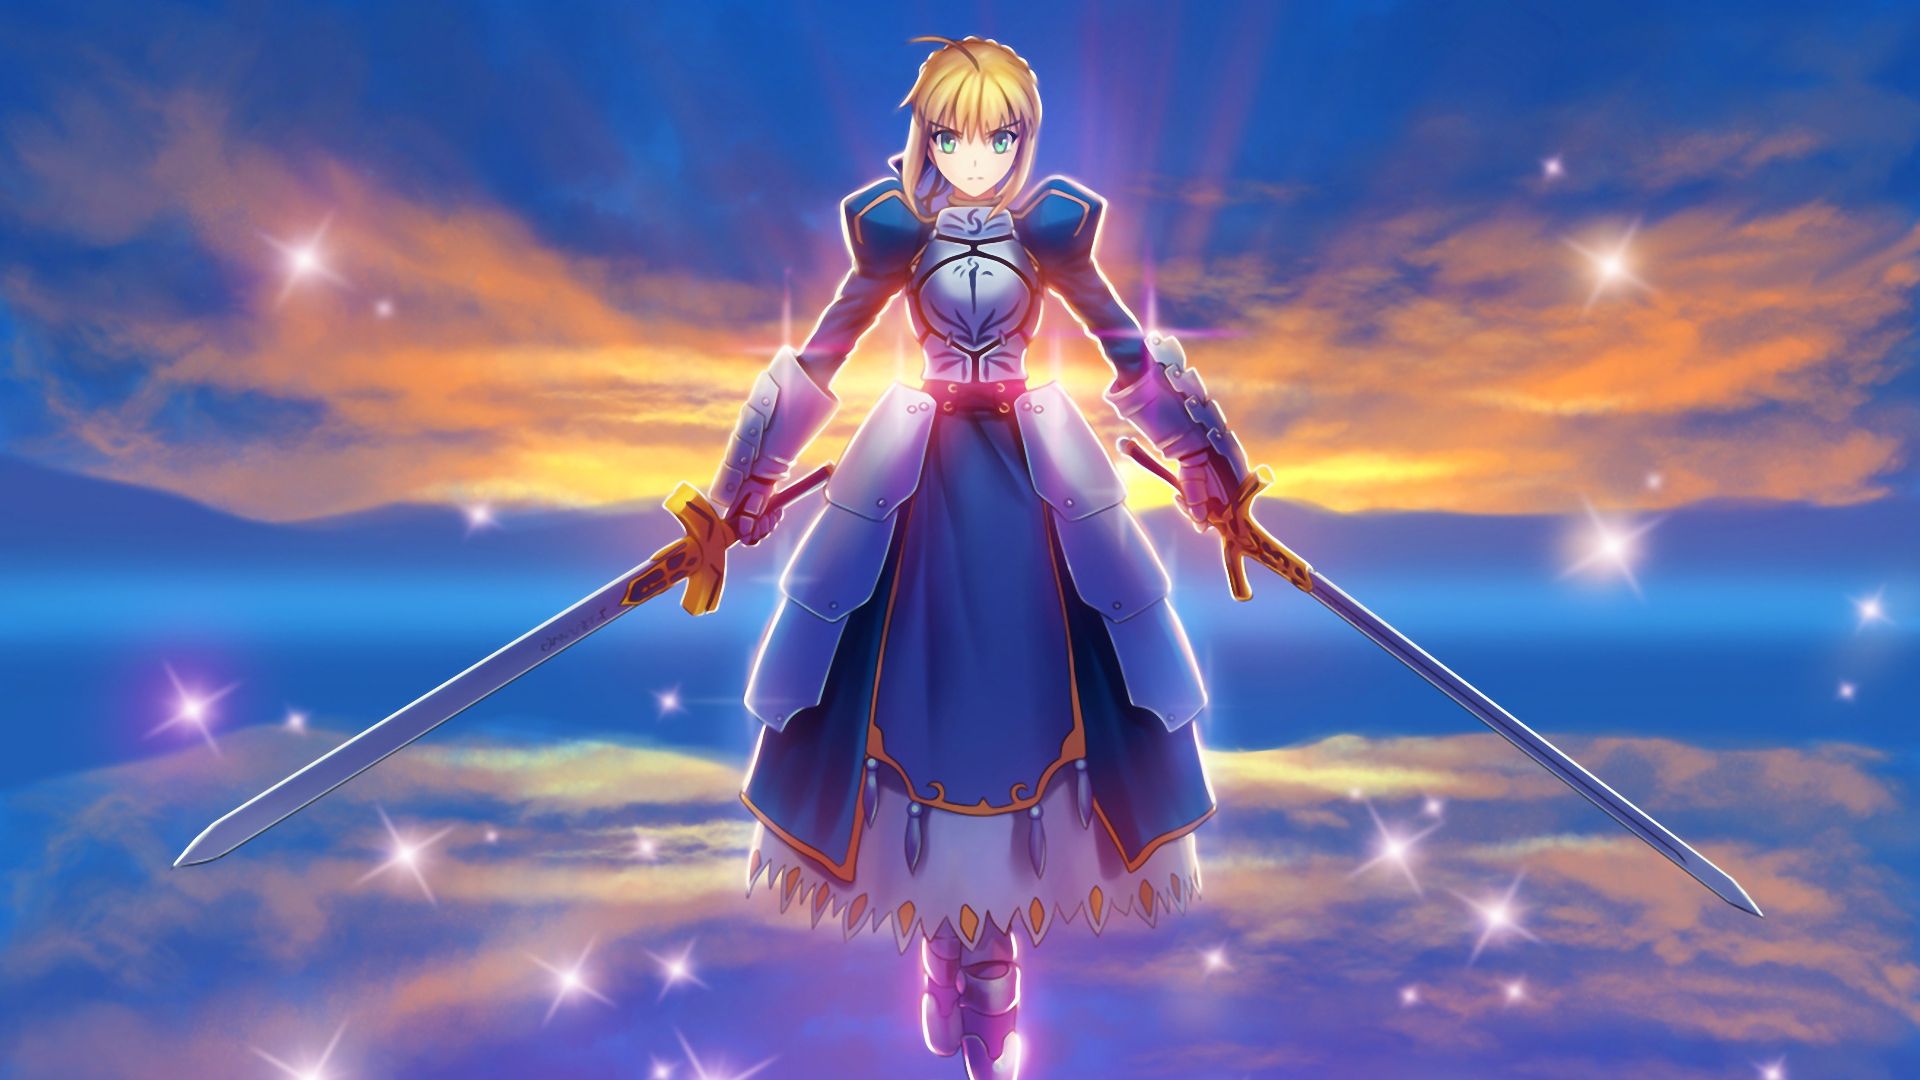 Desktop Wallpaper Saber, Fate Series, Anime, Hd Image, Picture, Background,  6cpkws